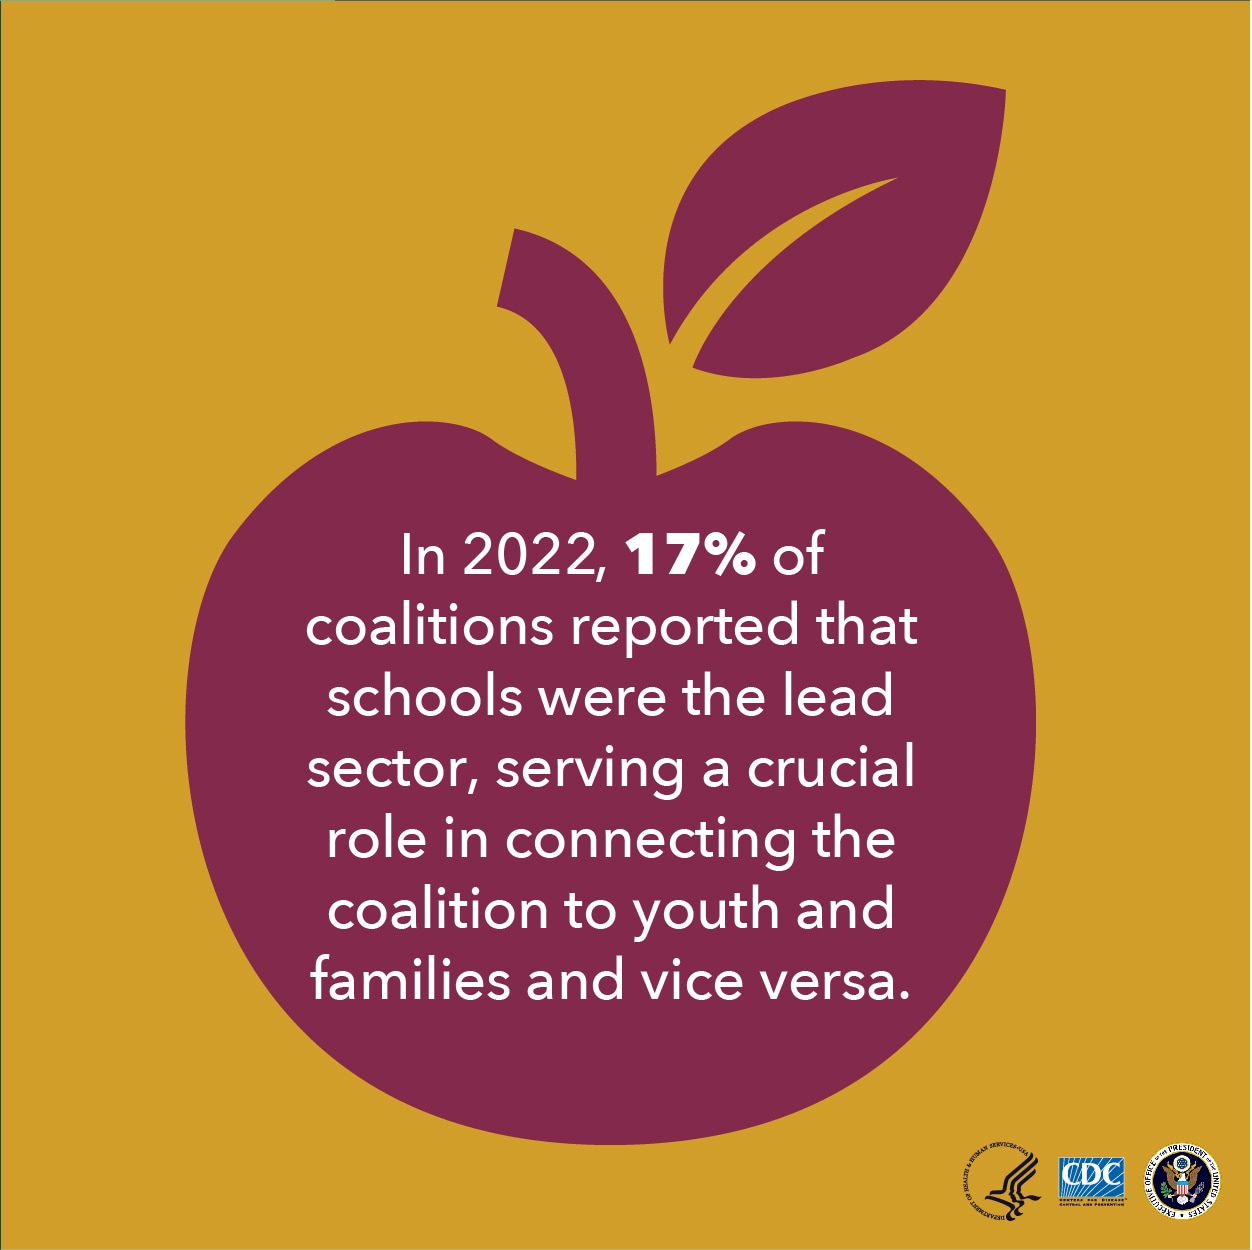 In 2022, 17% of coalitions reported that schools were the lead sector, serving a crucial role in connecting the coalition to youth and families and vice versa.